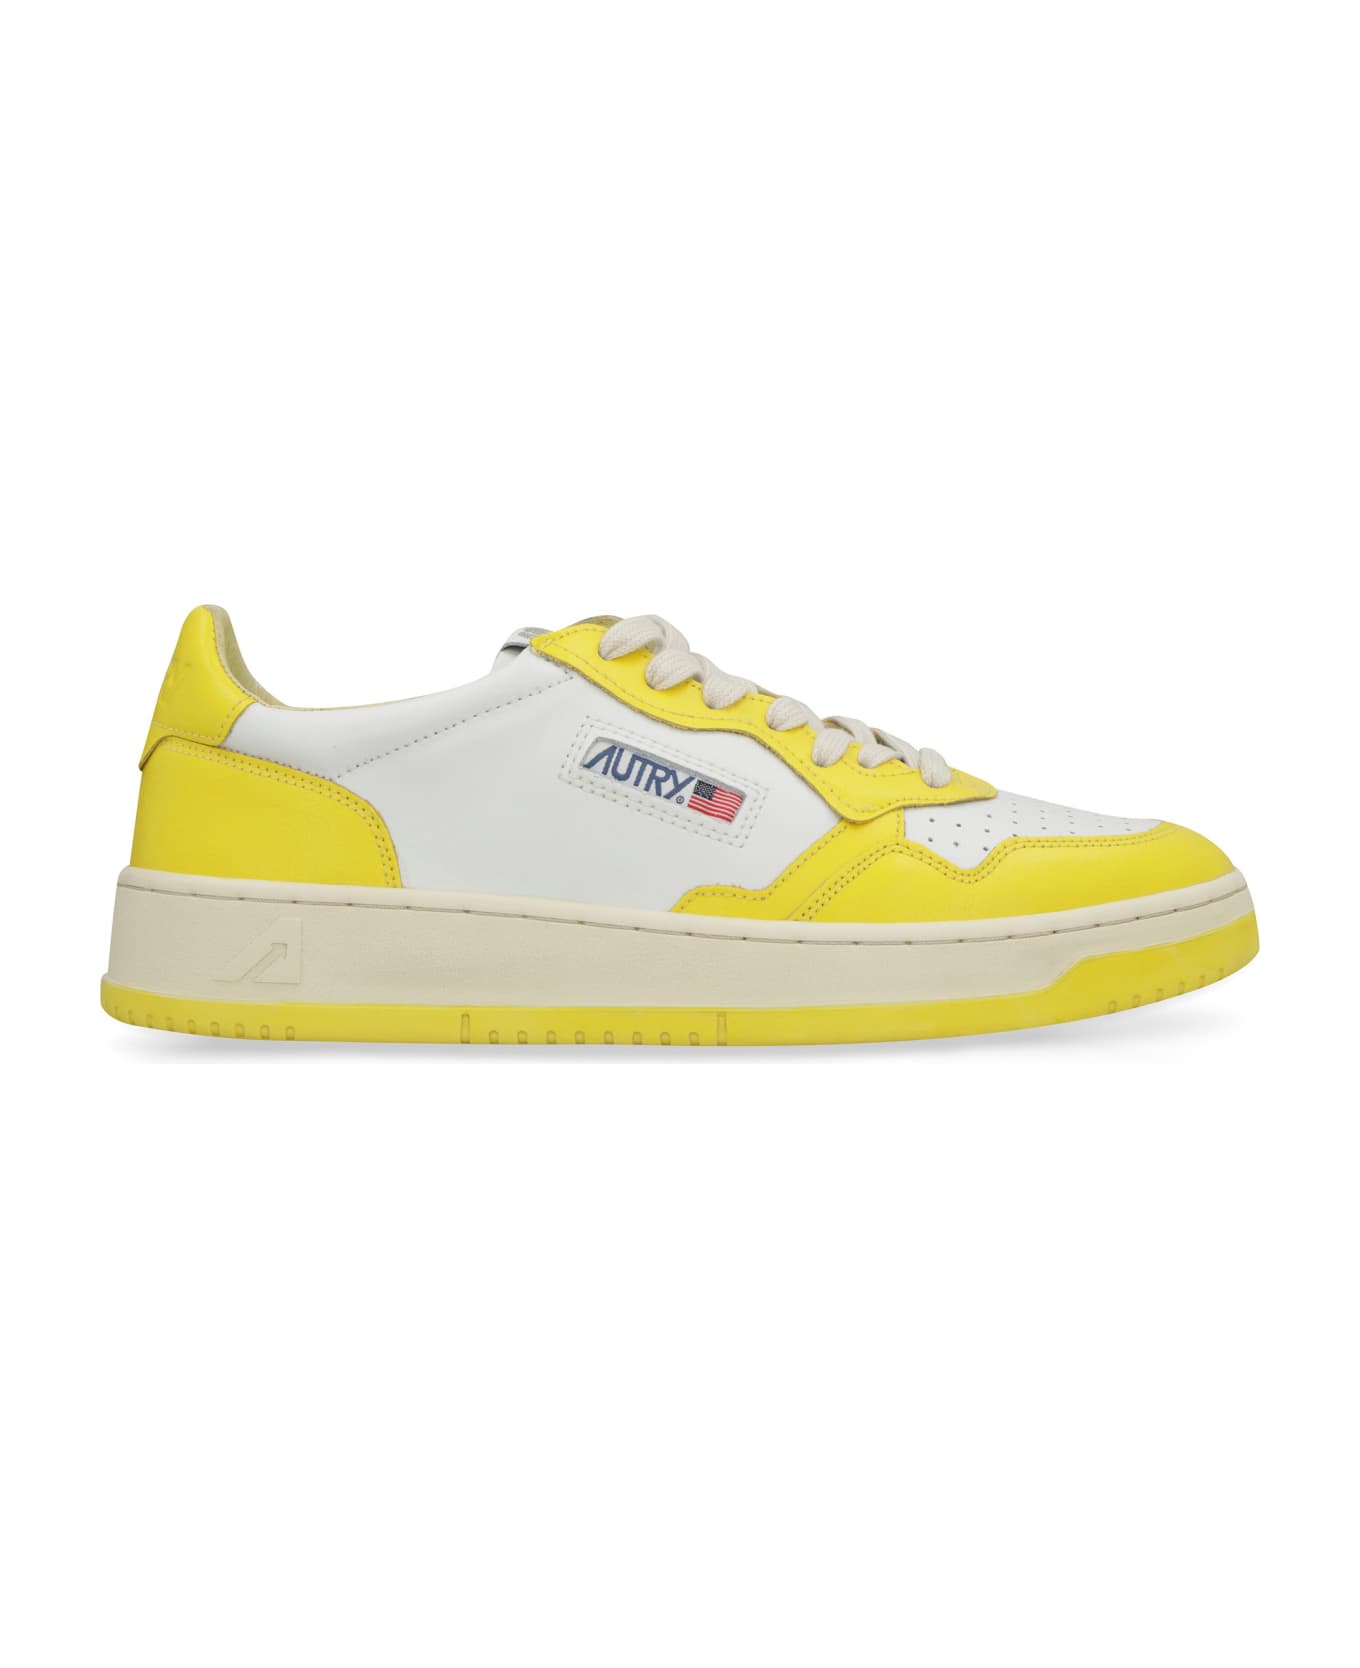 Autry 01 Low Man Goat Sneakers - Yellow